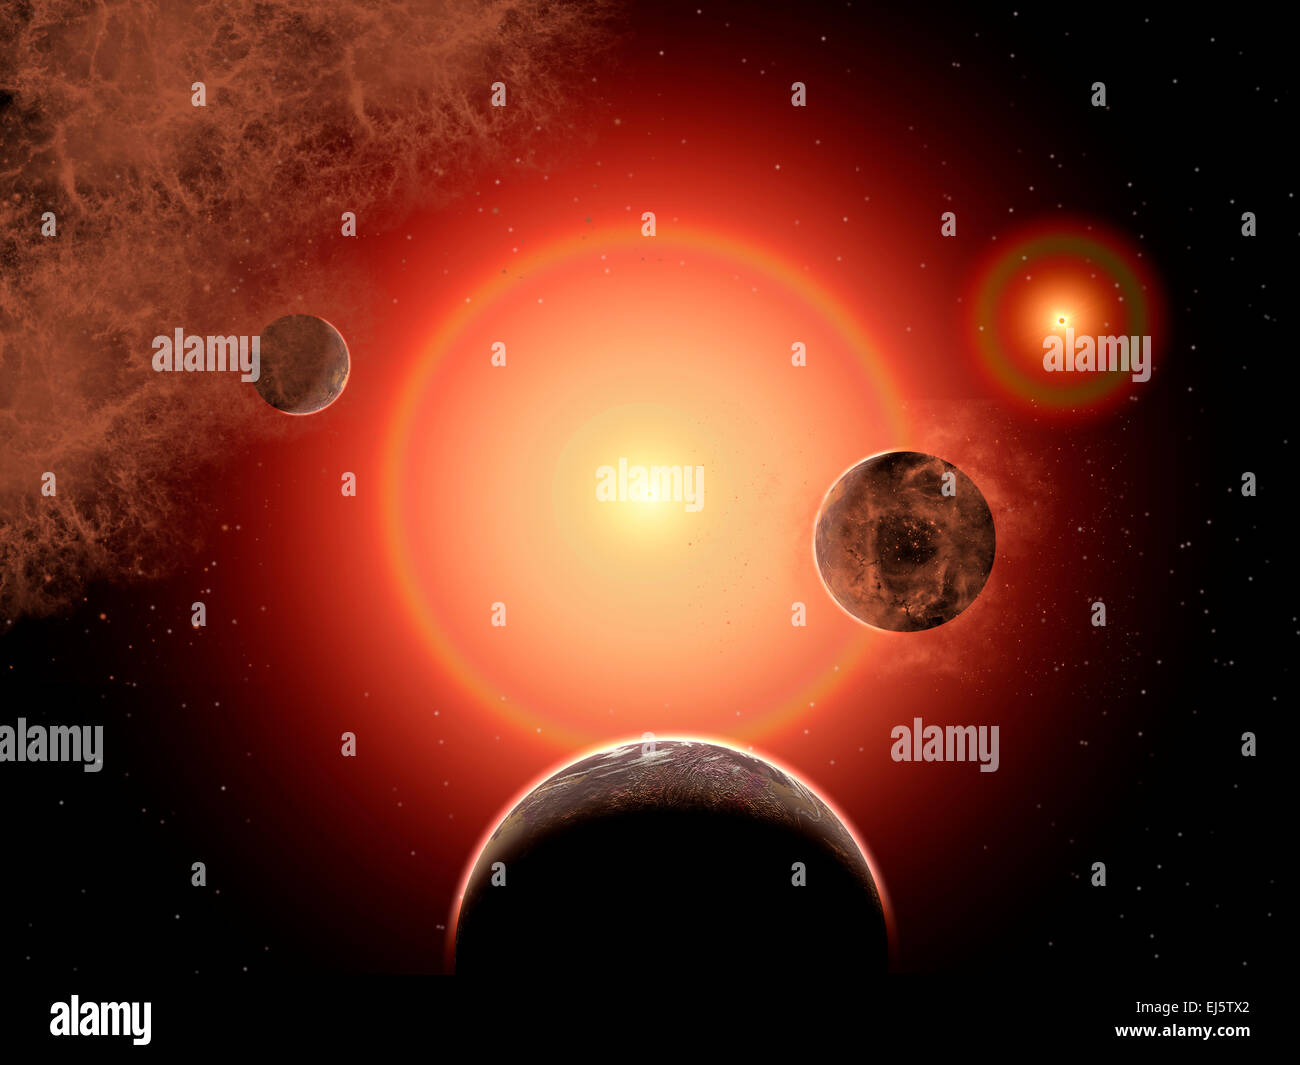 Planets In Orbit Around A Binary Star System . Stock Photo